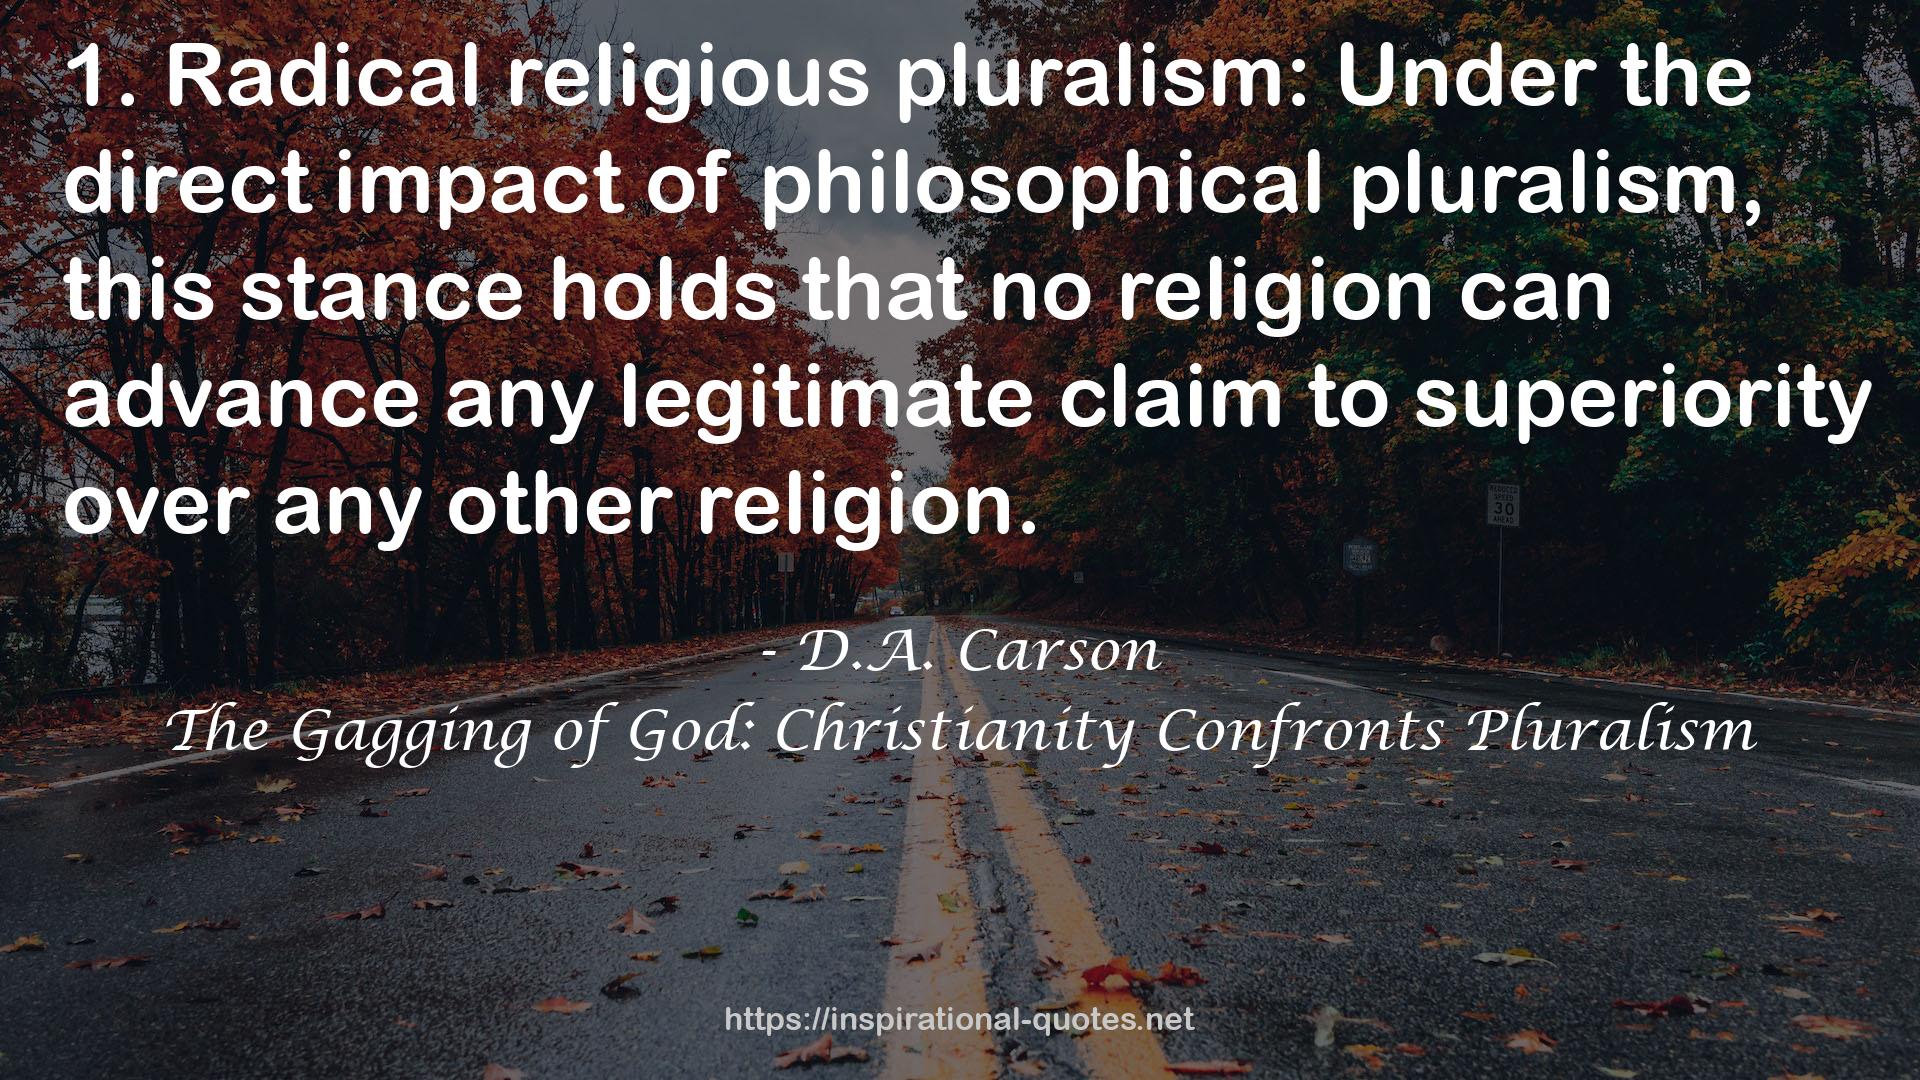 The Gagging of God: Christianity Confronts Pluralism QUOTES